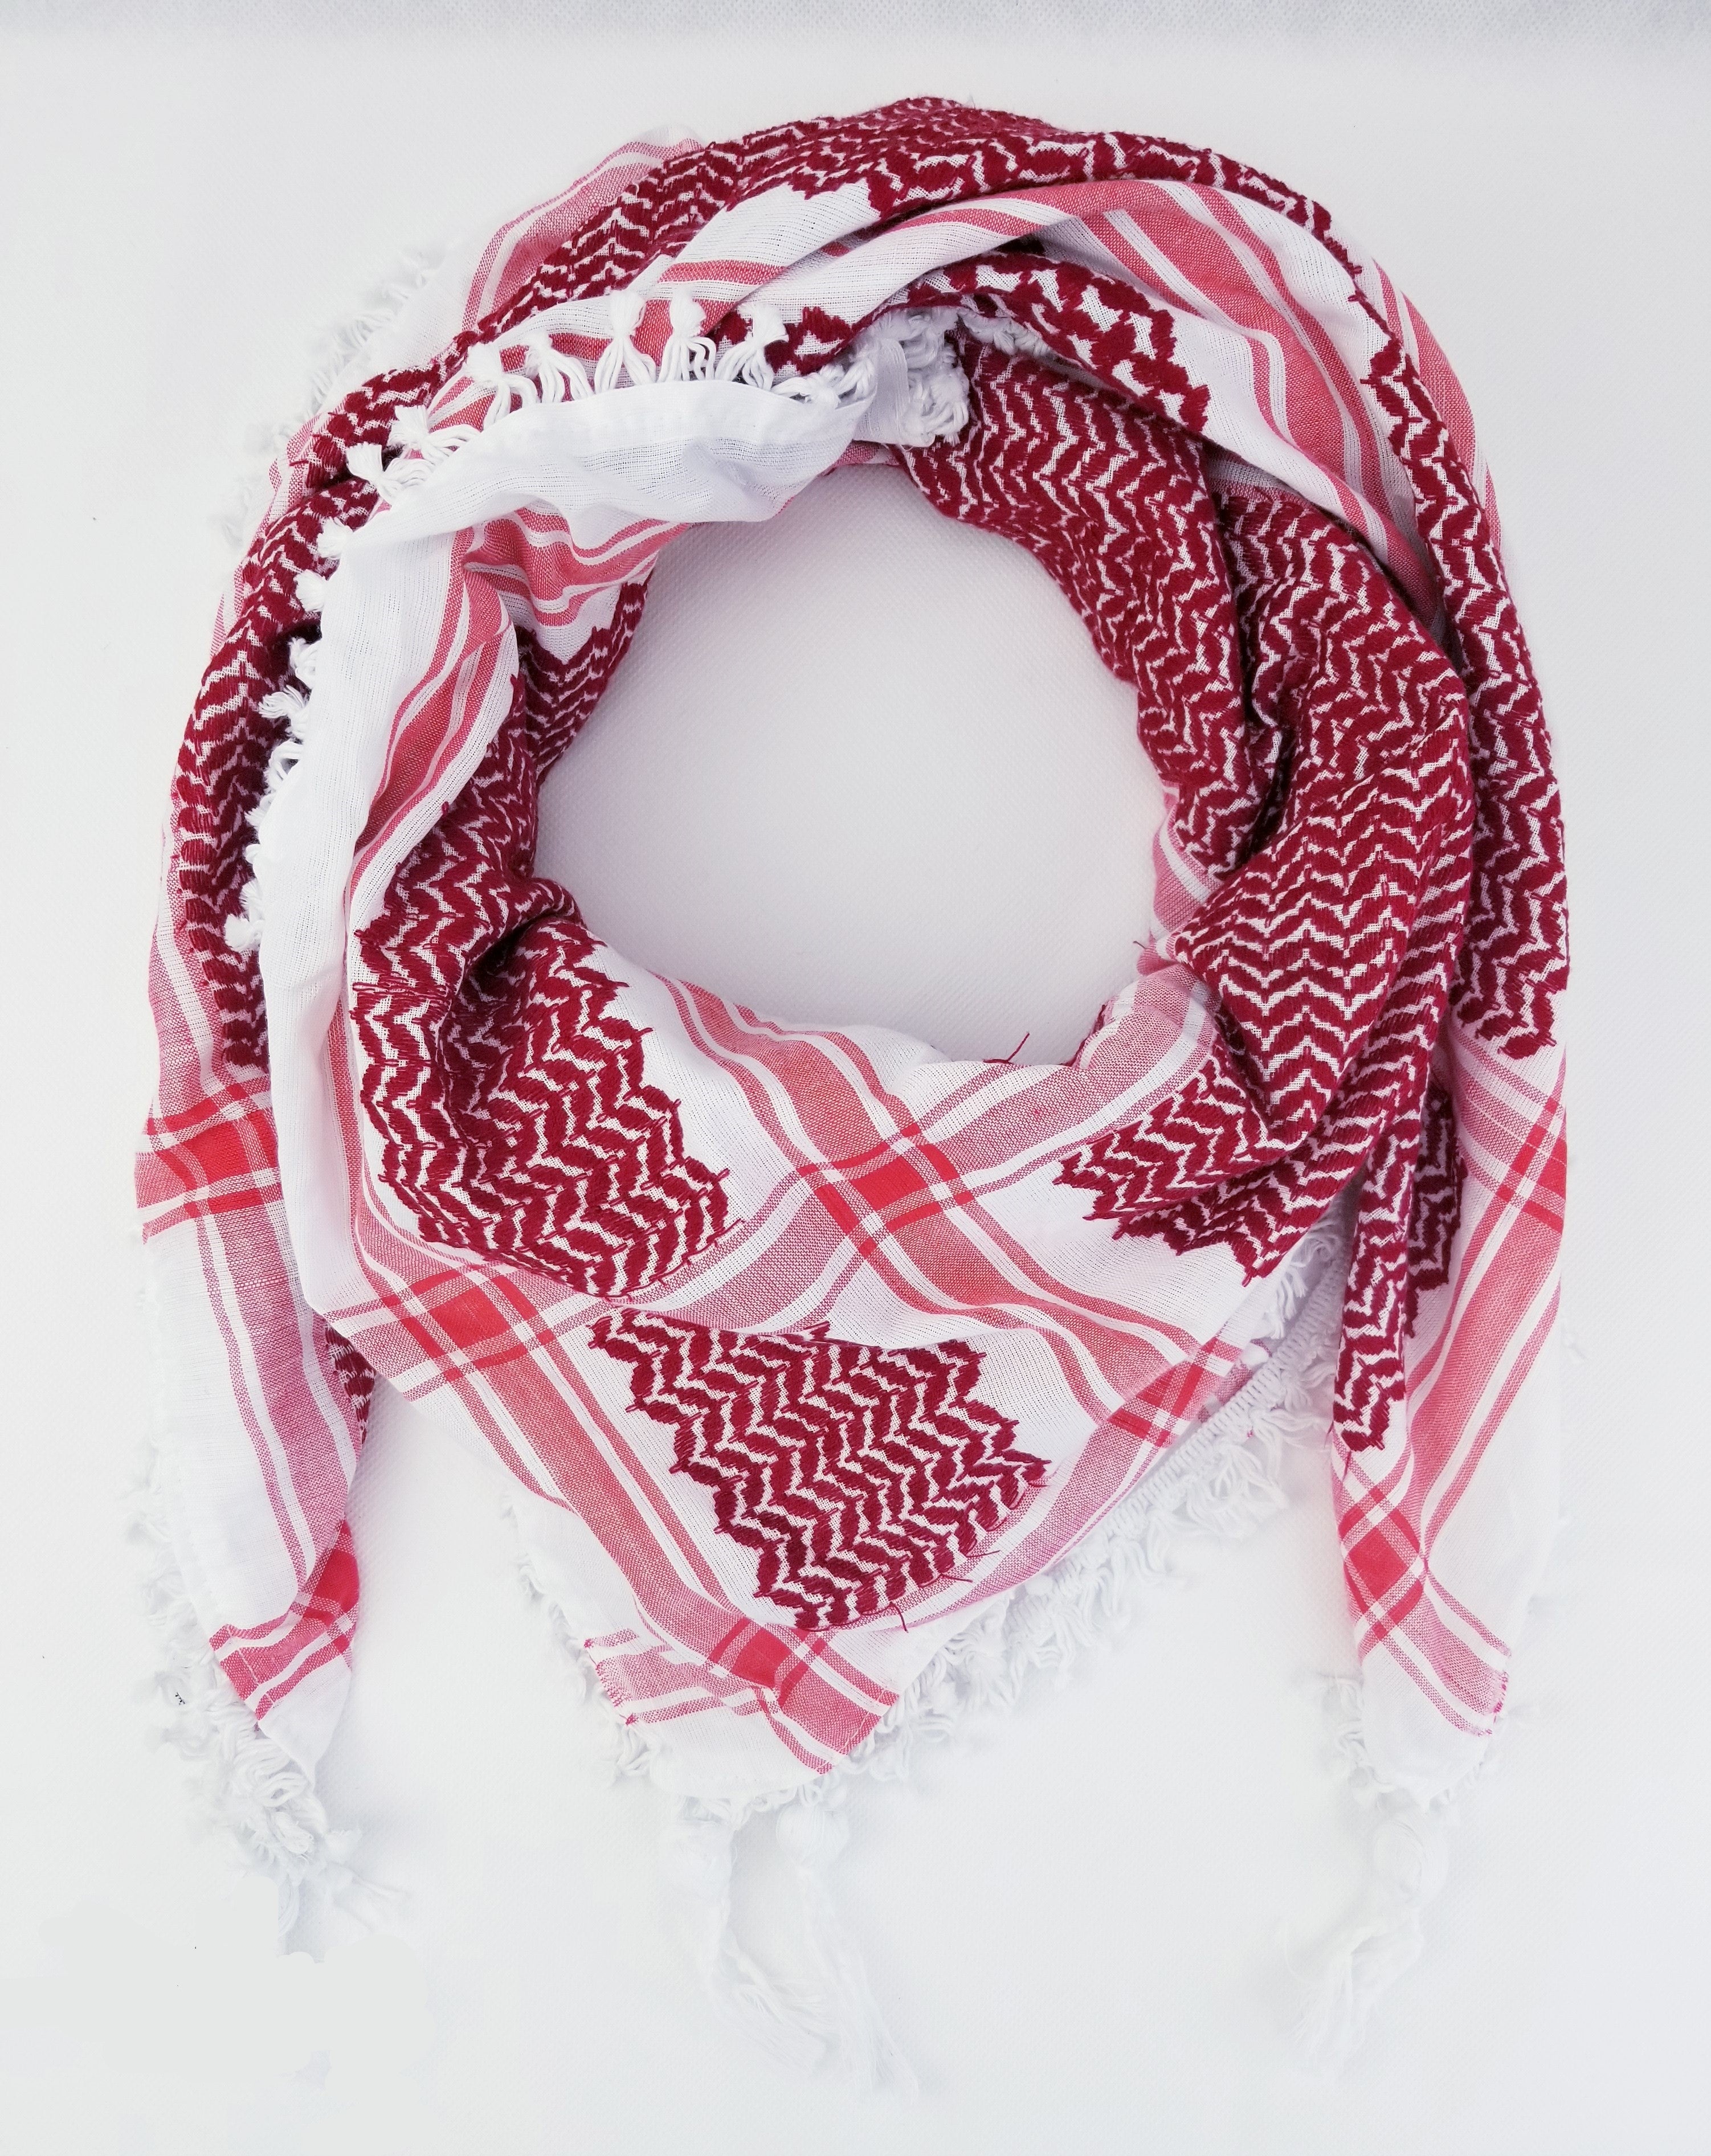 Red and White Keffiyeh Scarf - Made in Palestine